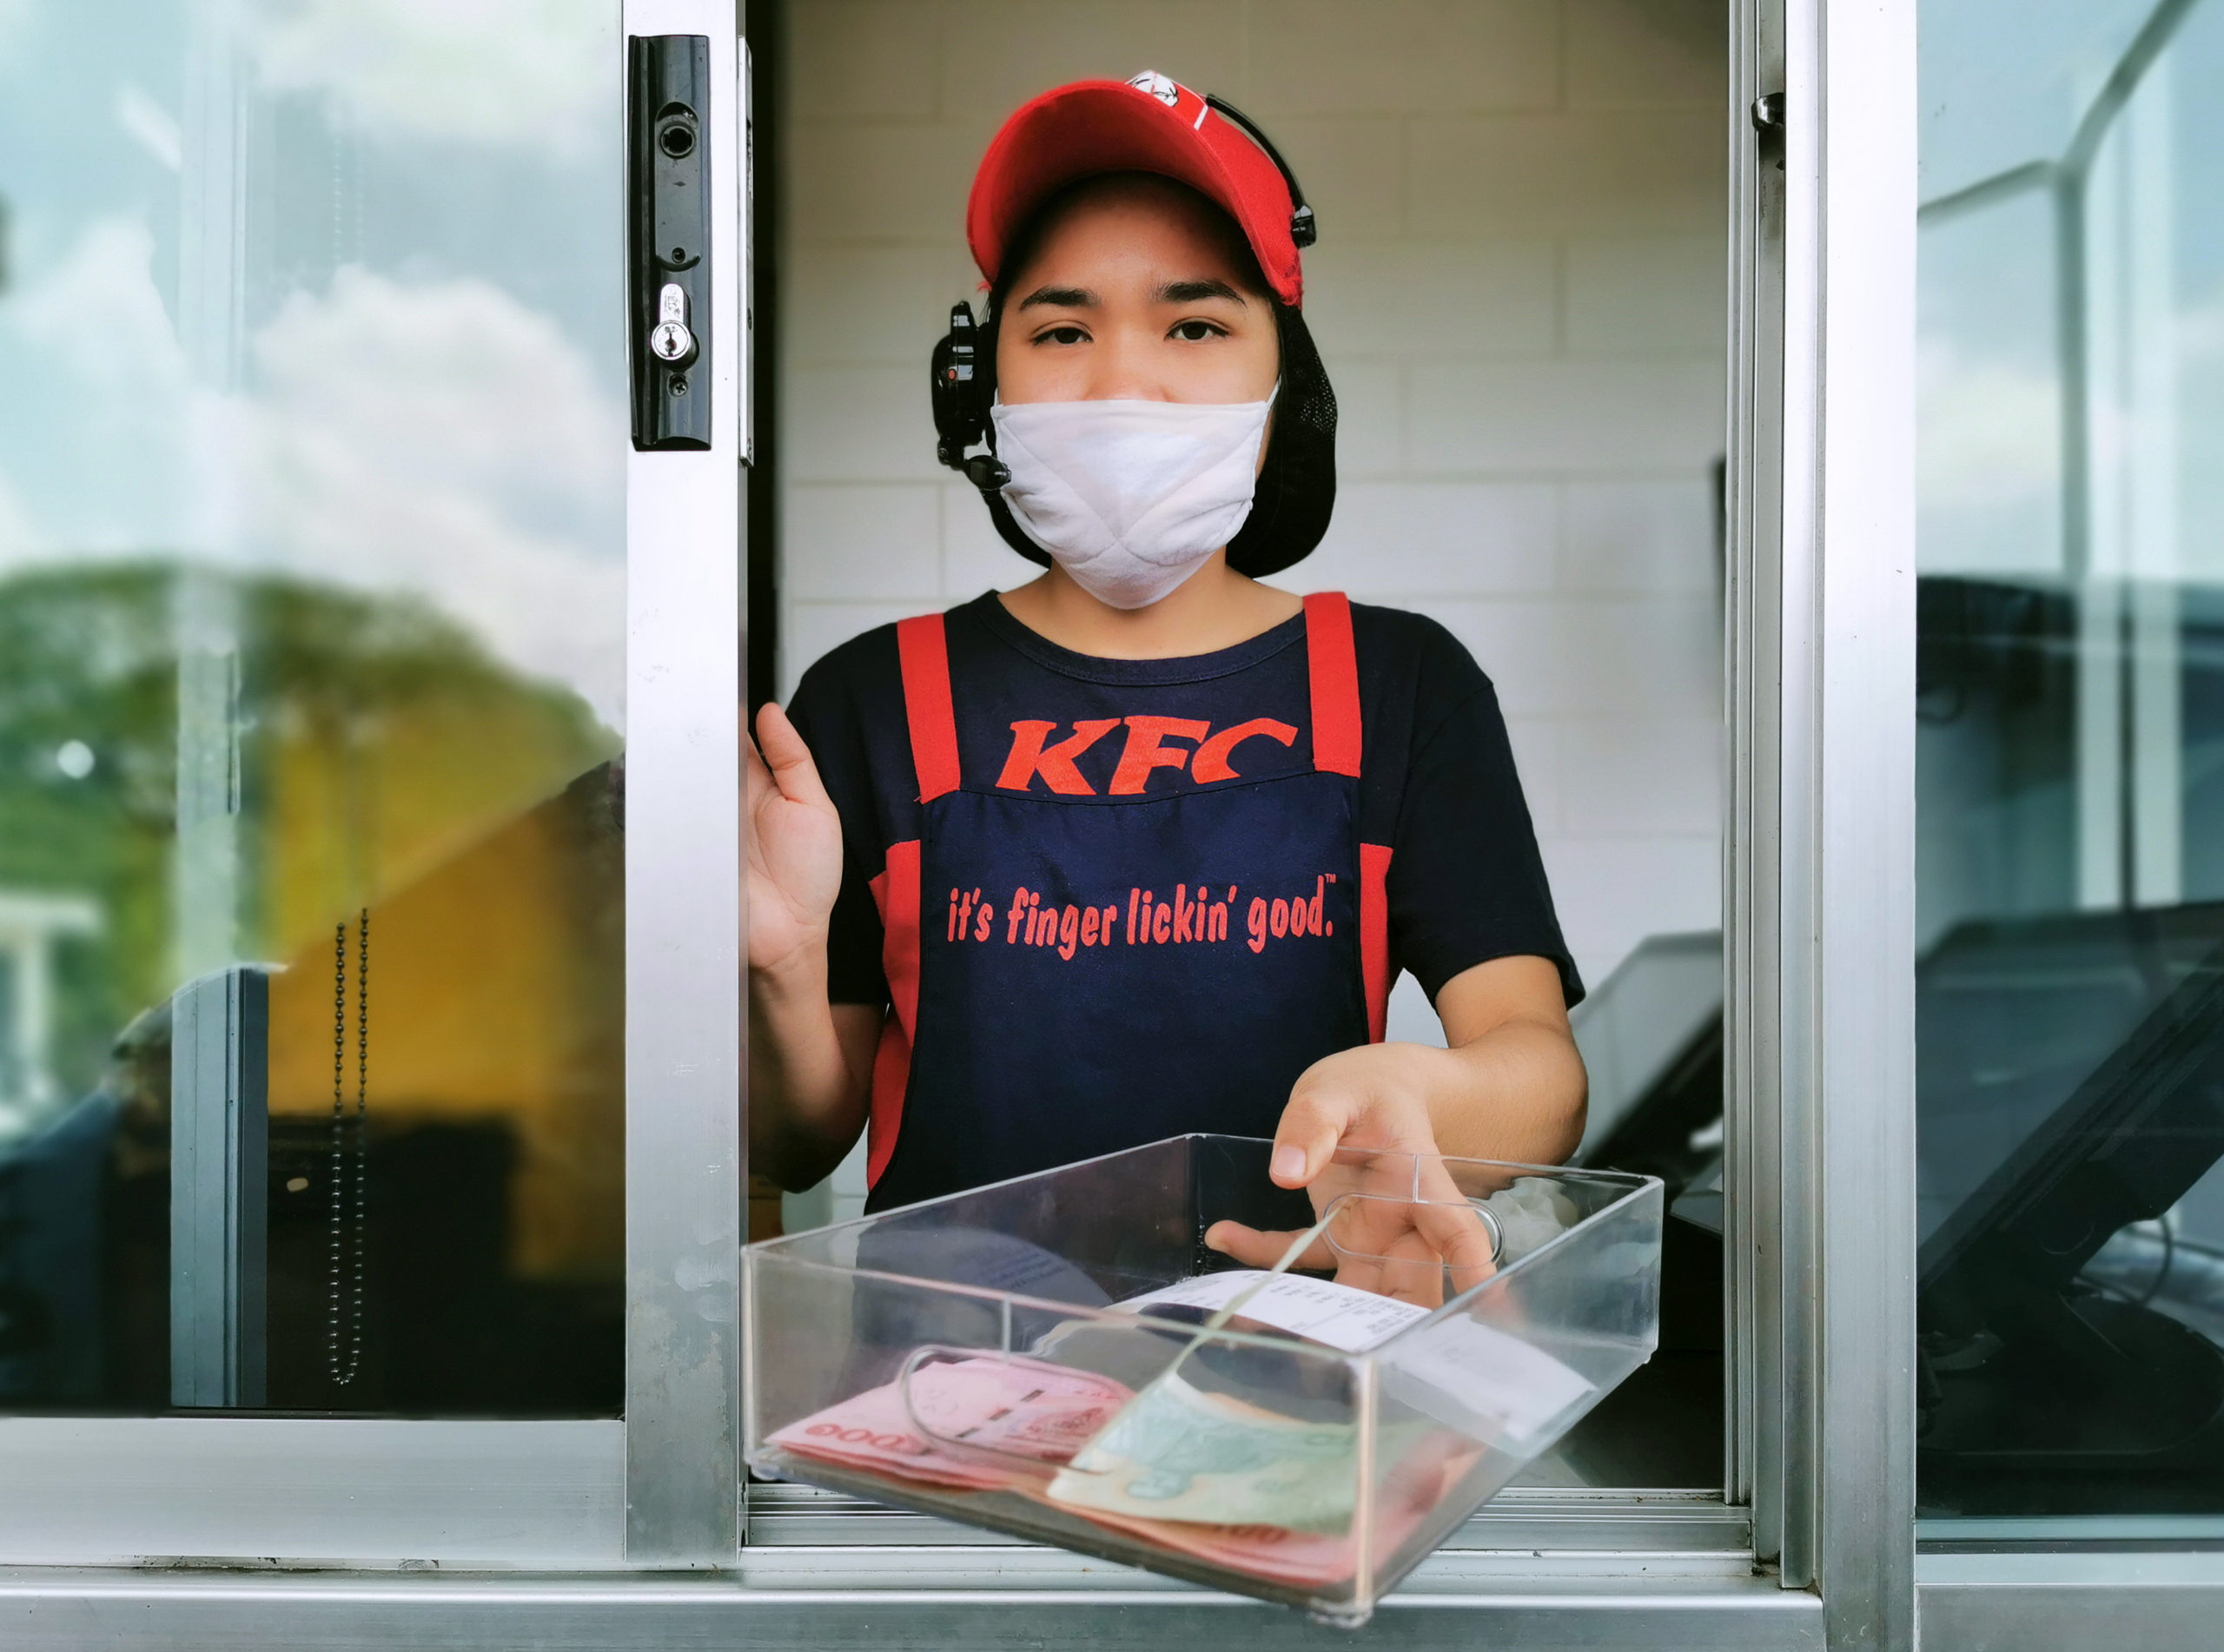 KFC fast food cashier in drive thru service waring hygiene face mask to protect coronavirus pandemic or covid-19 virus outbreak is giving money change to customer.